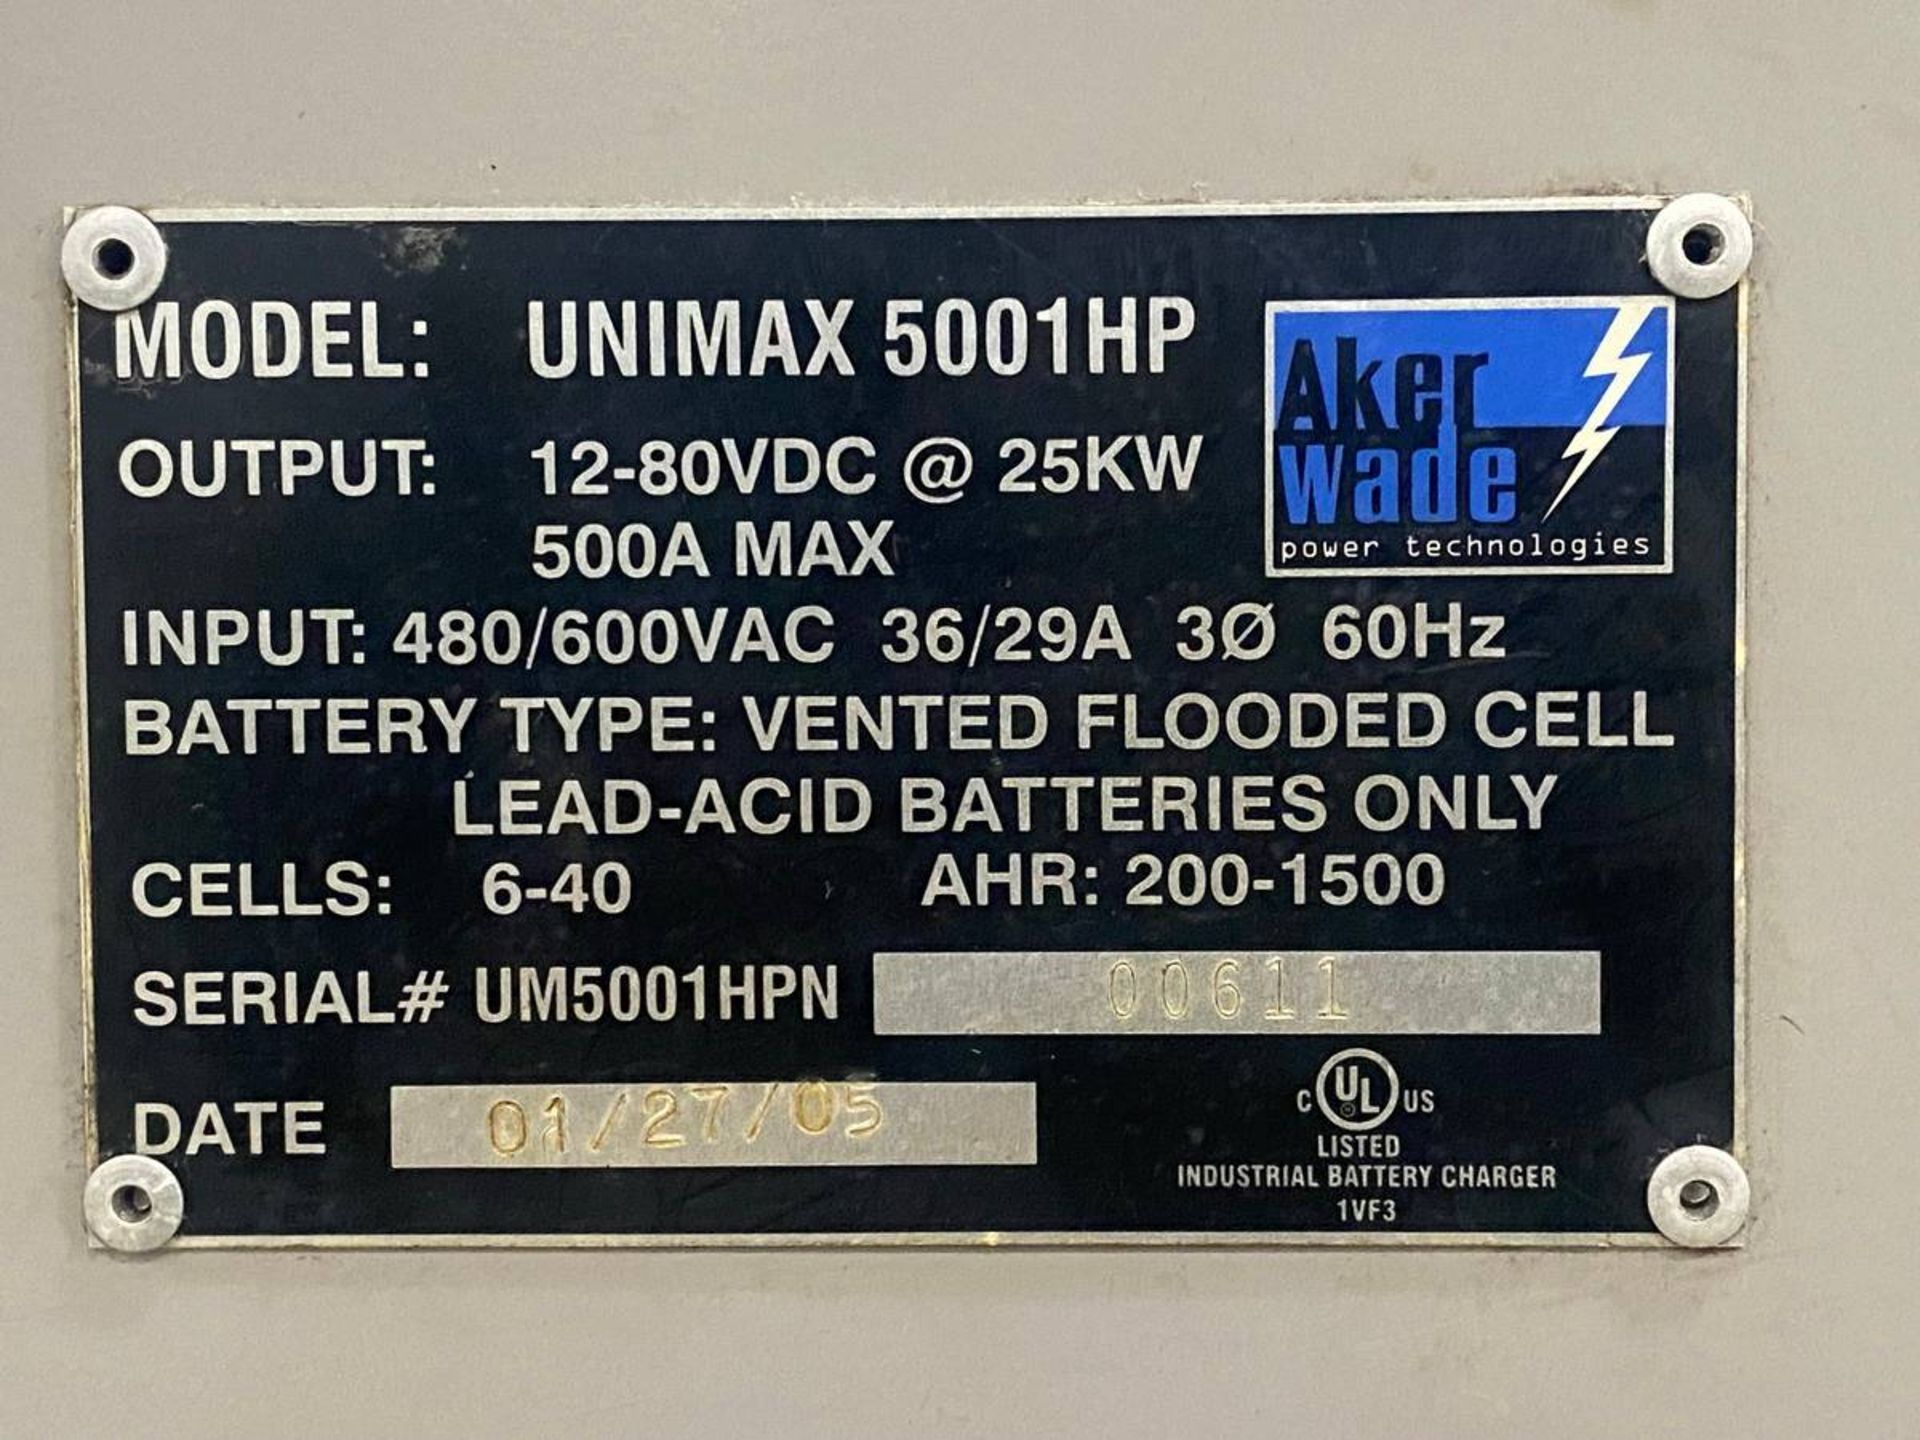 2005 Uni Max 500 6-40 Cells Battery Charger - Image 4 of 4